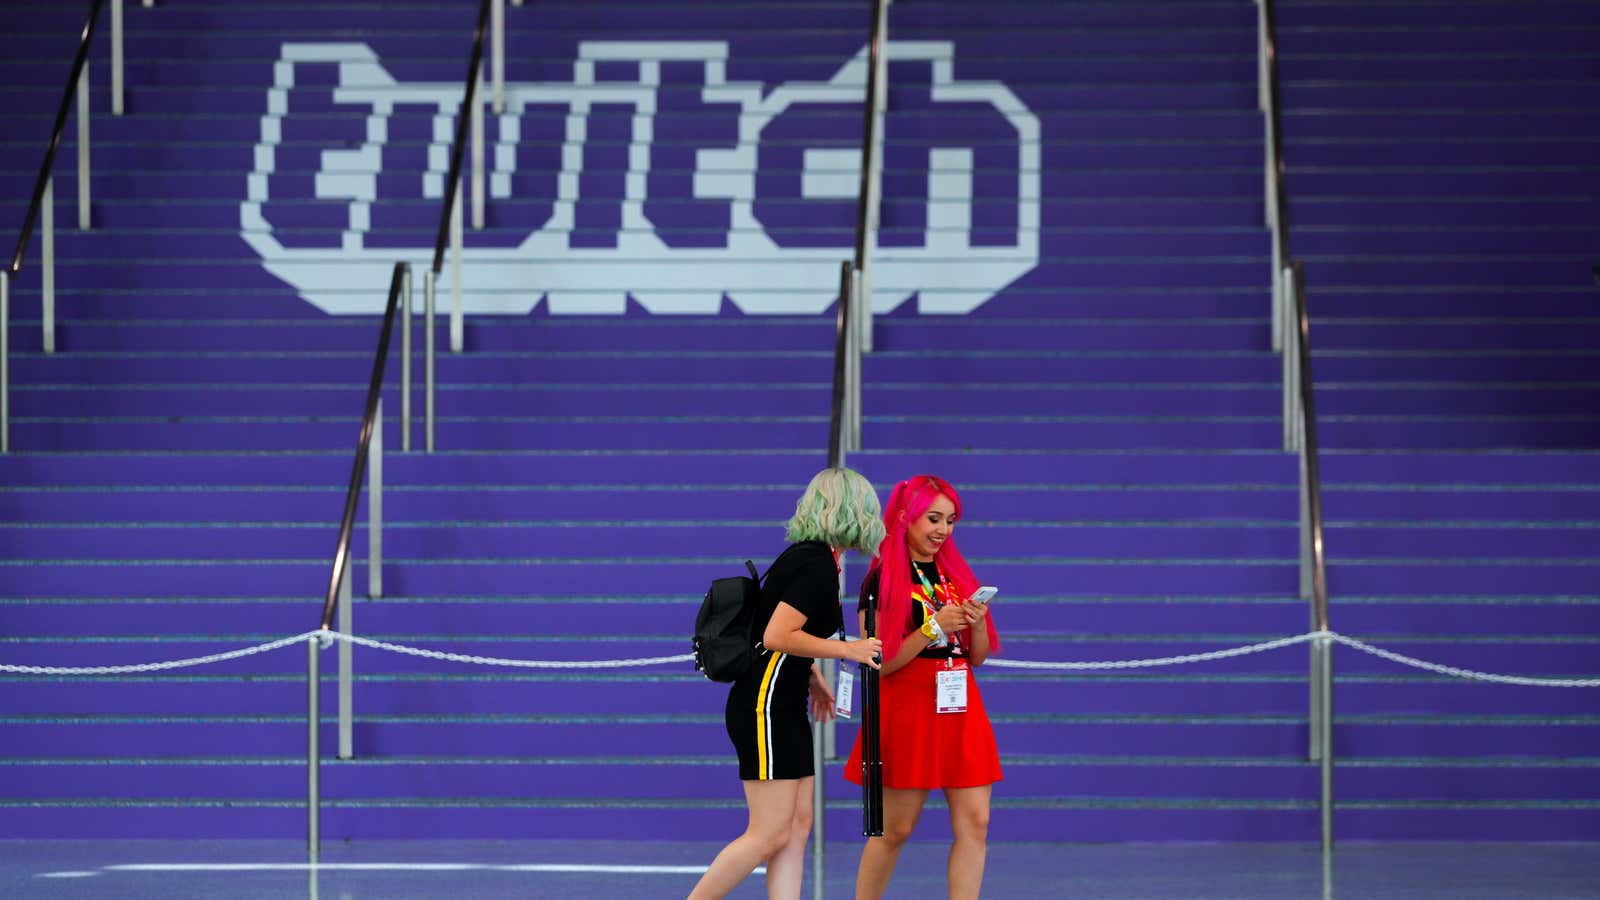 rebrands Twitch Prime as Prime Gaming to broaden audience